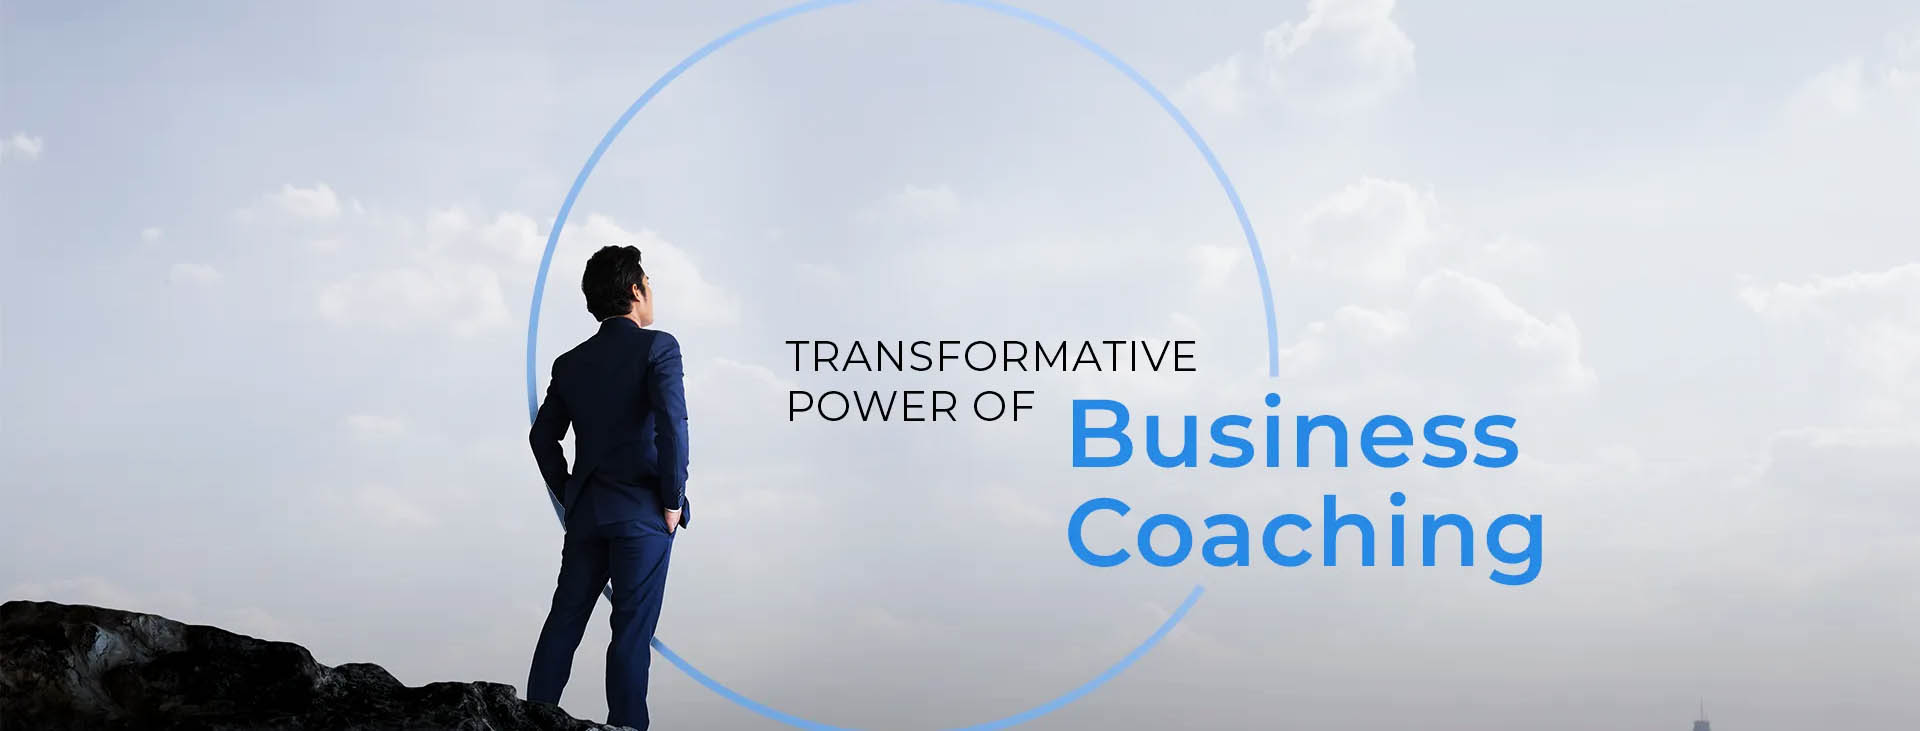 Mentoring Matters - Unleashing Potential: The Transformative Power of Business Coaching